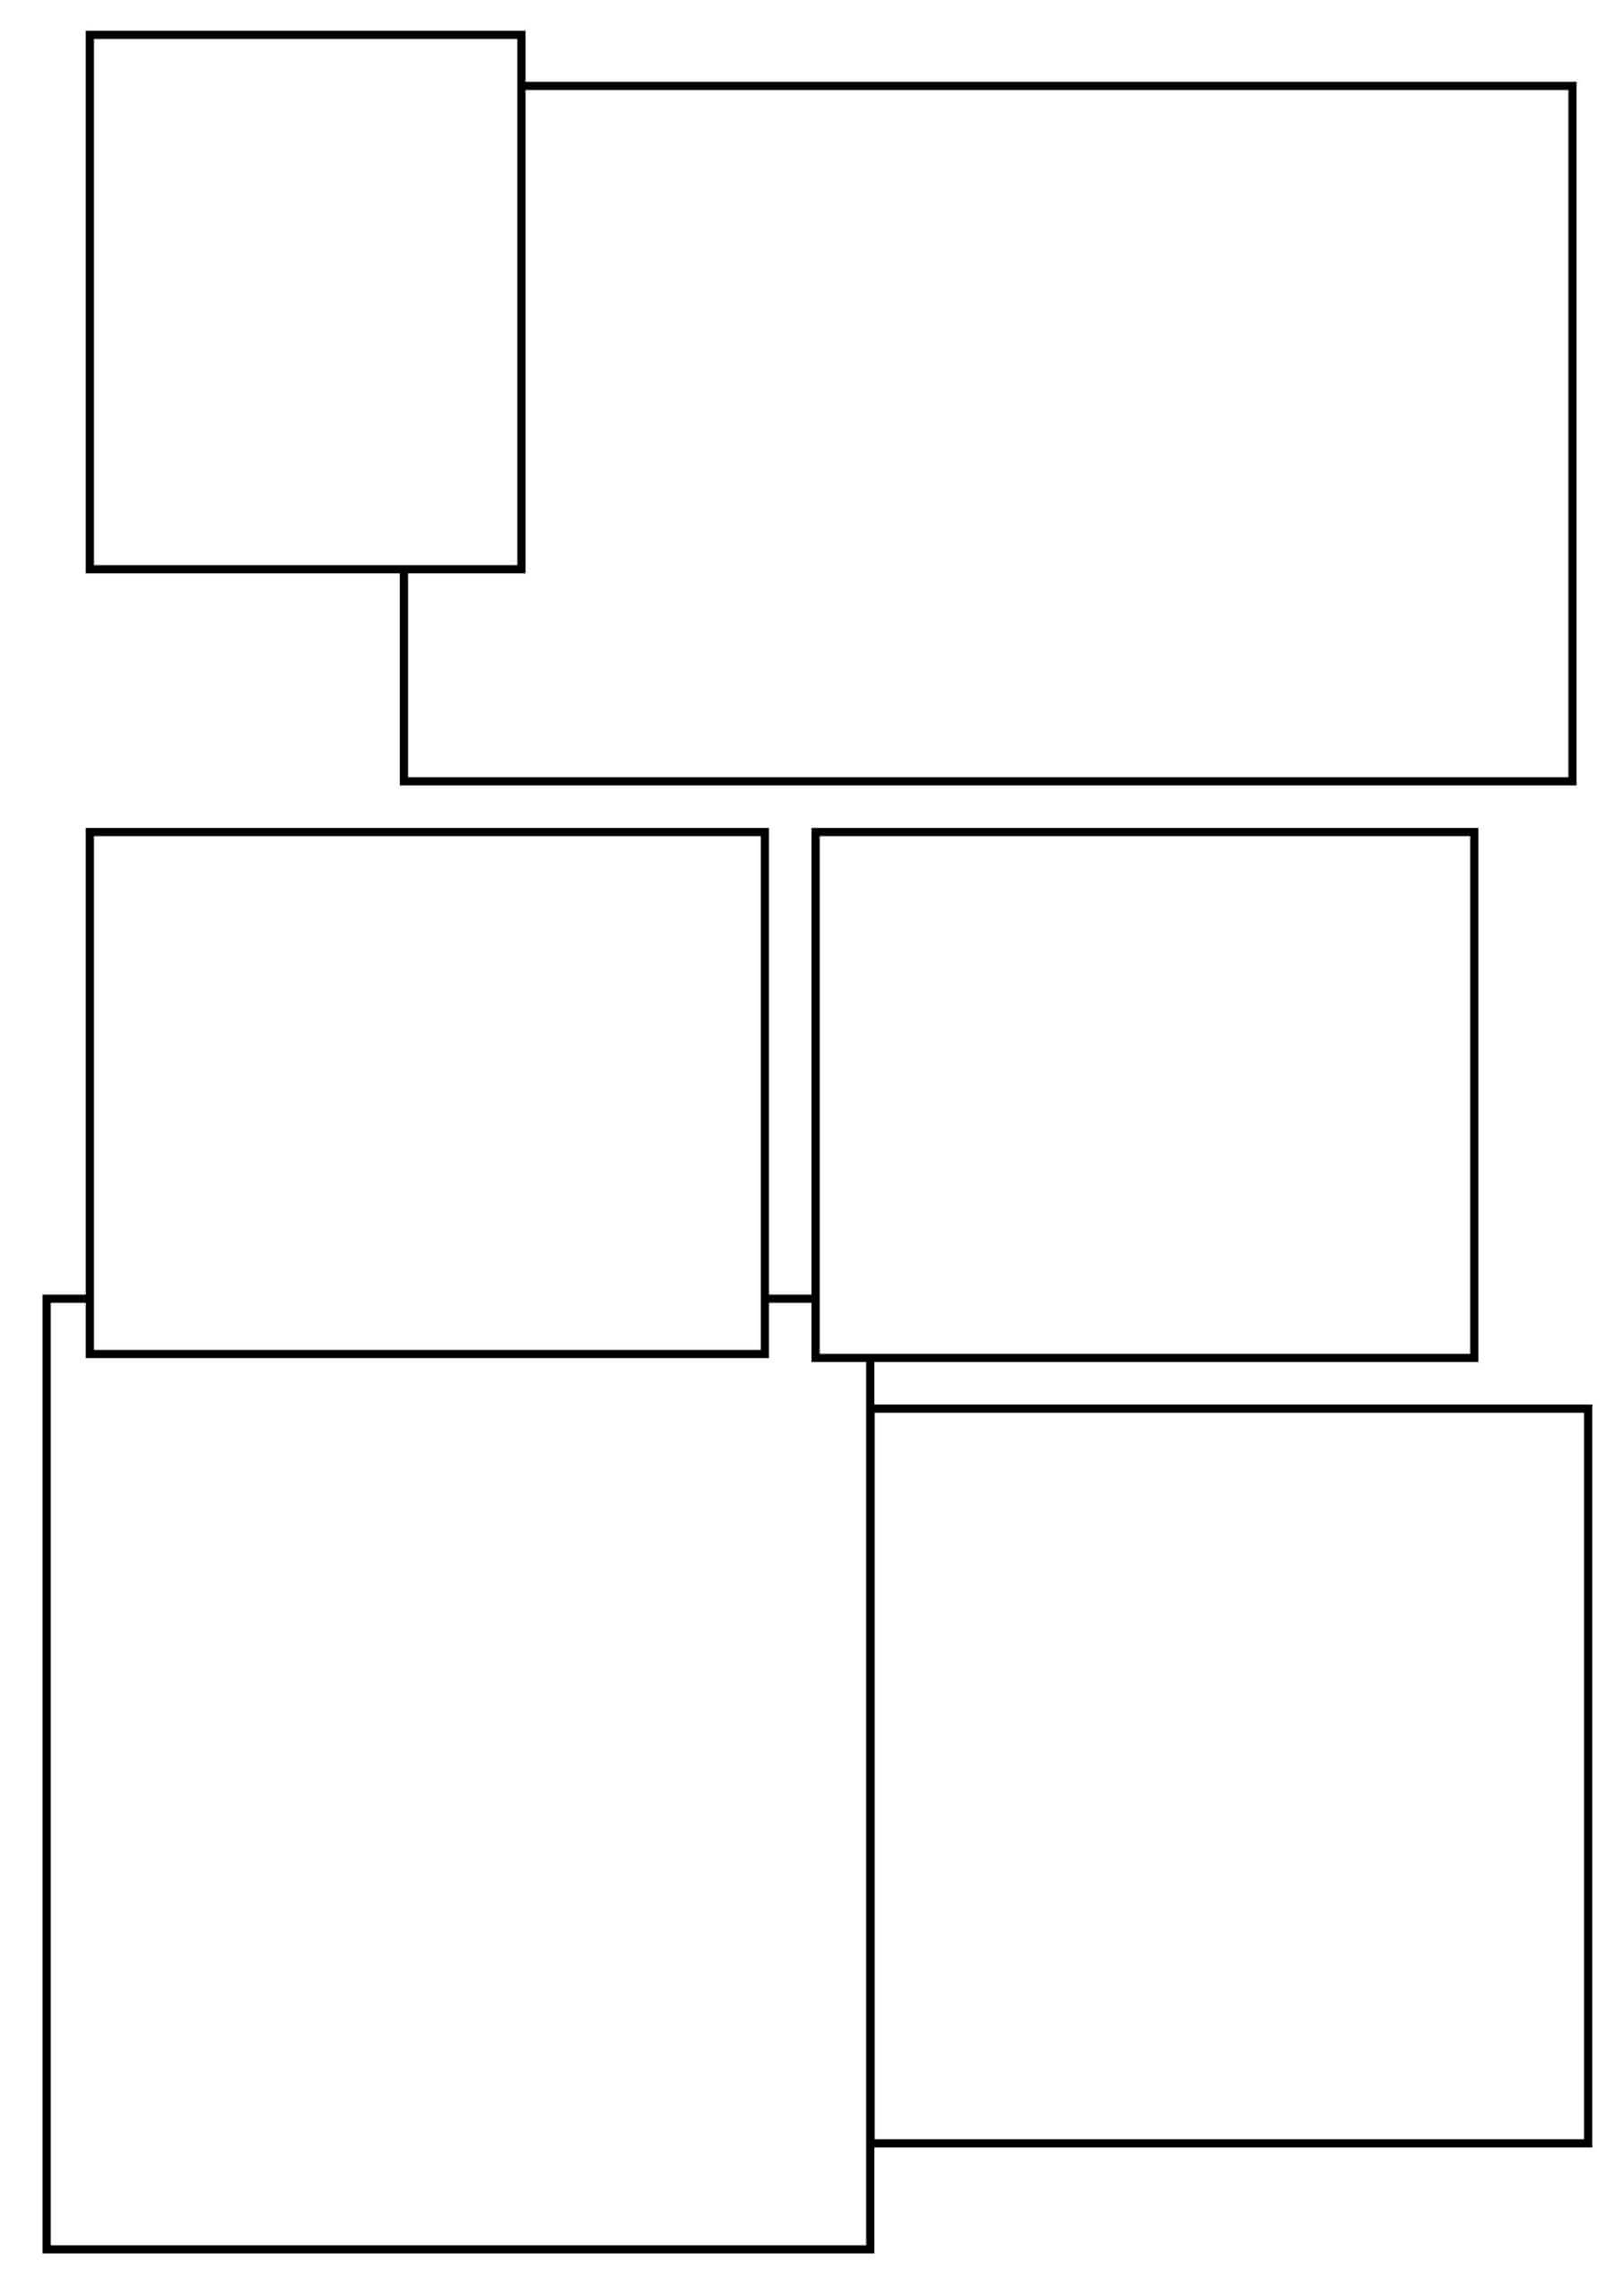 Setting Out Layouts For The Comic Strip | Emily Davison's Blog Regarding Printable Blank Comic Strip Template For Kids